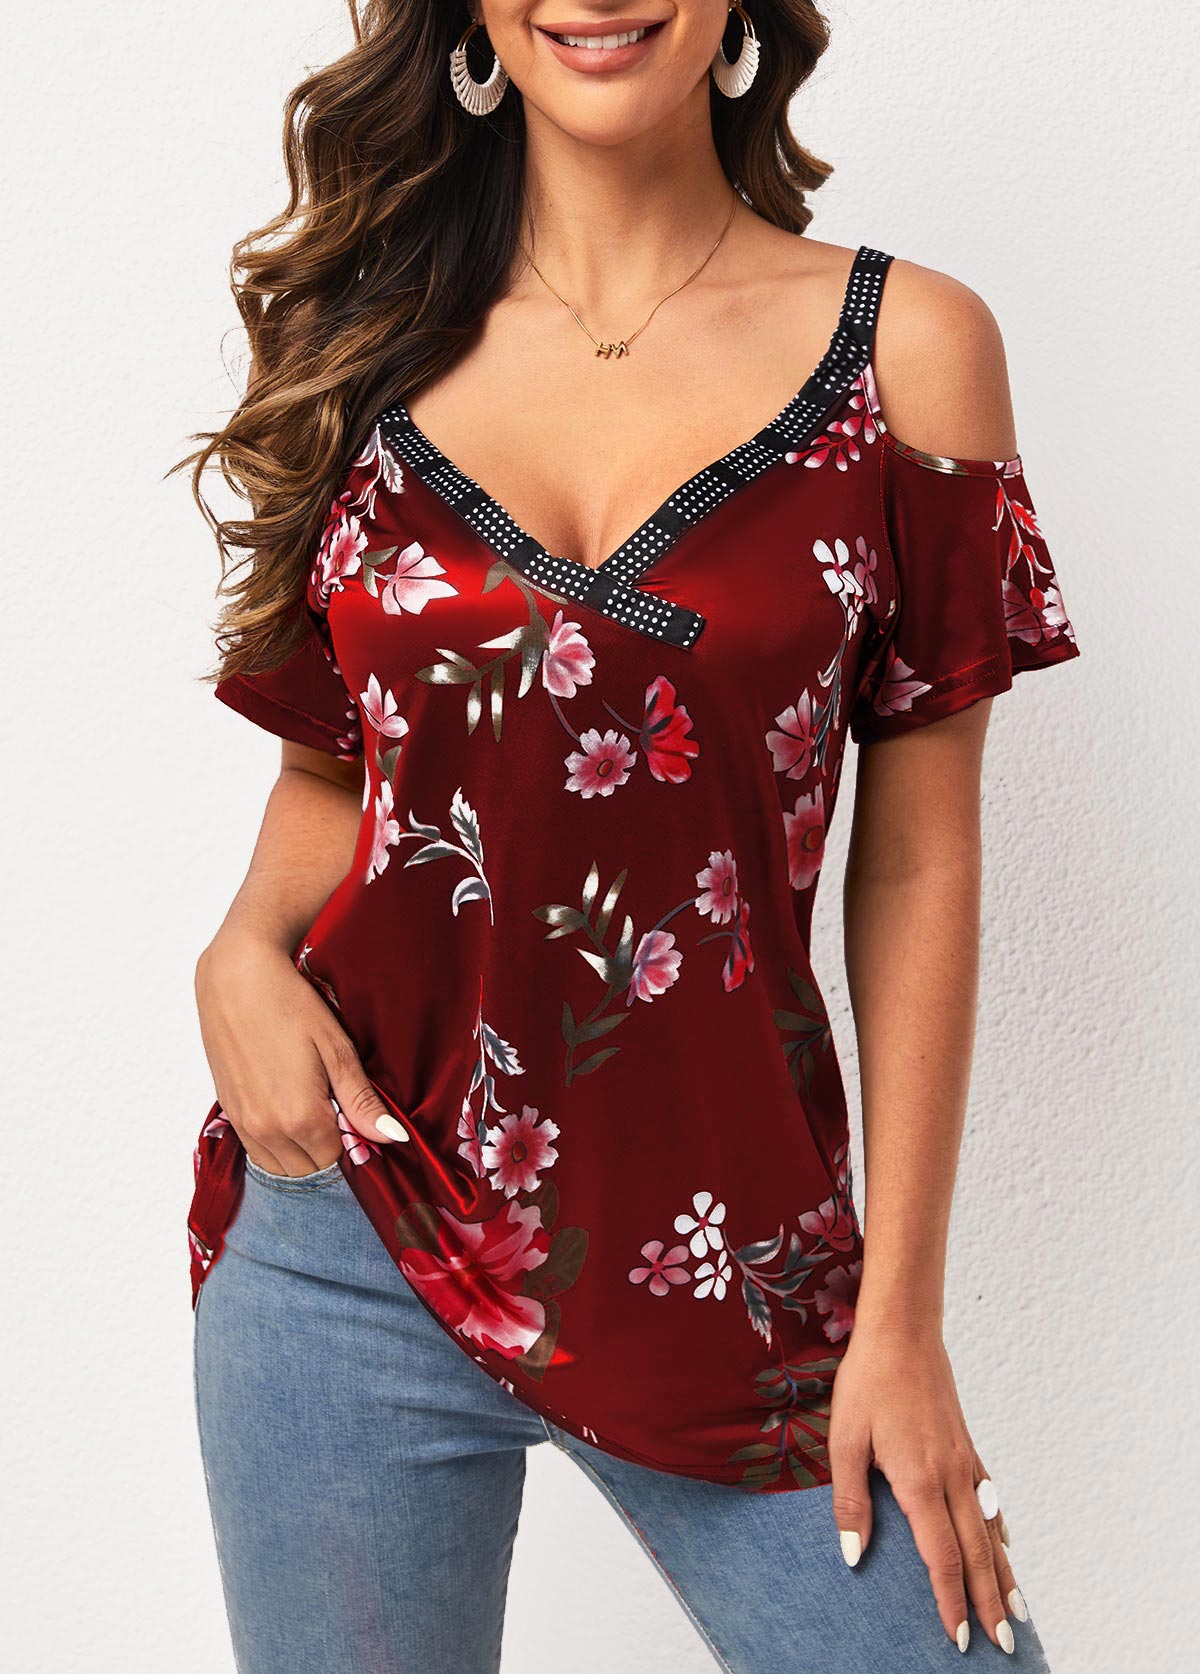 Strappy Cold Shoulder Floral Print Wine Red T Shirt